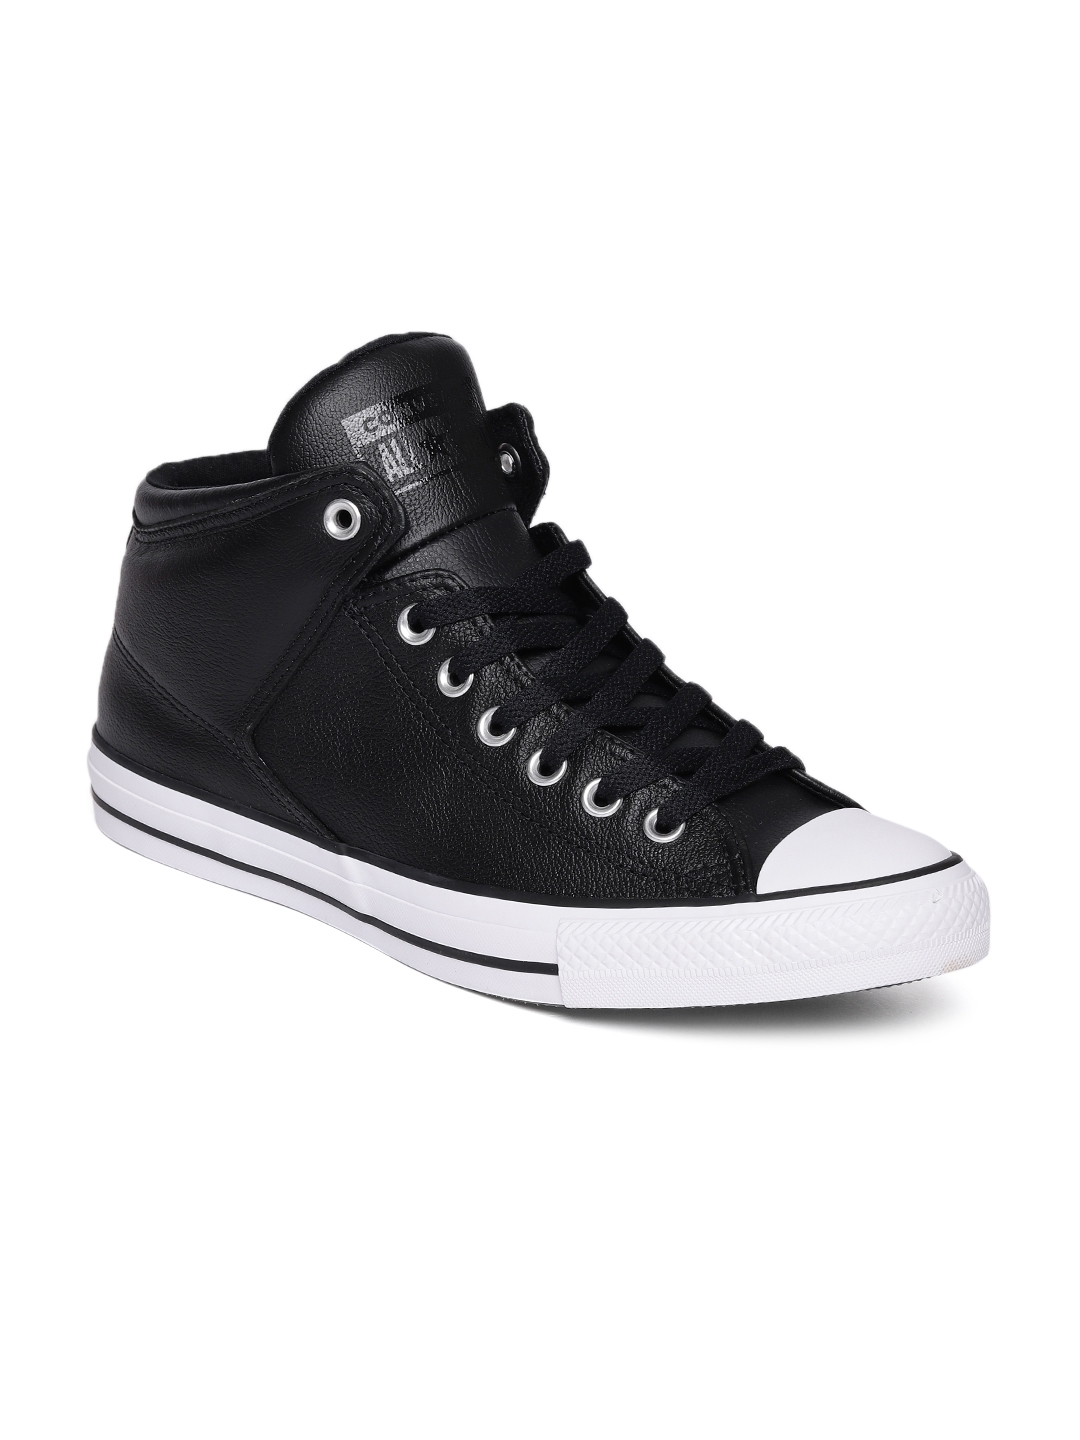 Buy Converse Men Black Solid Mid Top Leather Sneakers - Casual Shoes for  Men 9965047 | Myntra